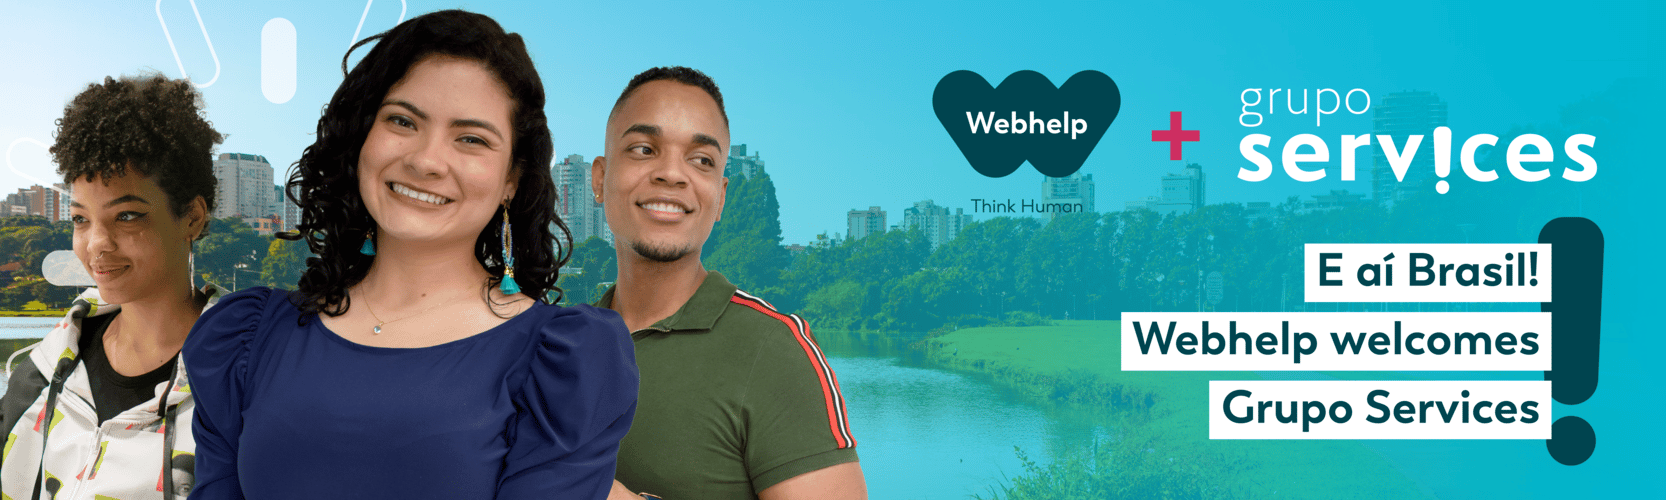 Webhelp expands to Brazil with Grupo Services